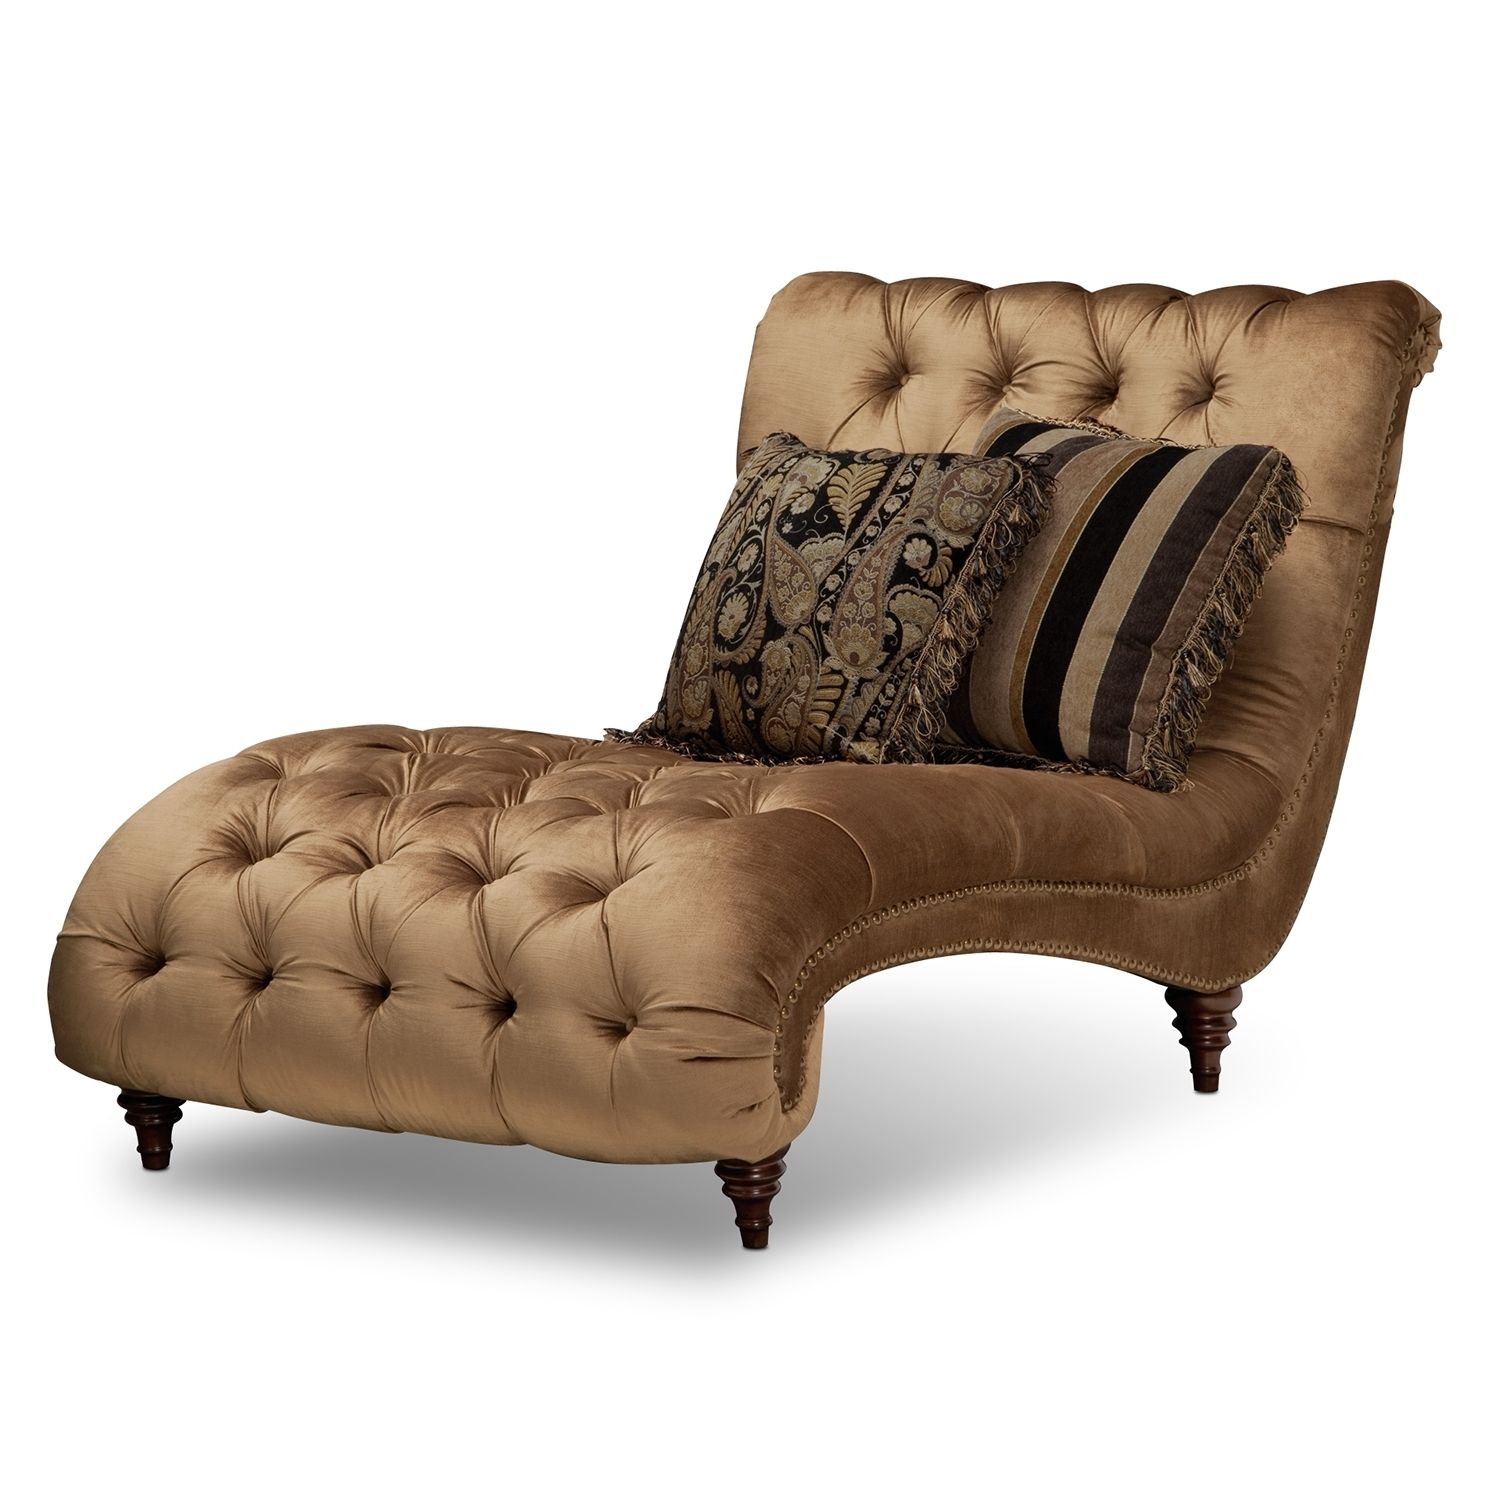 Gold Tufted Chaise Lounge Chair With Accent Pillows In Bedroom Intended For Most Recently Released Tufted Chaise Lounge Chairs (Photo 11 of 15)